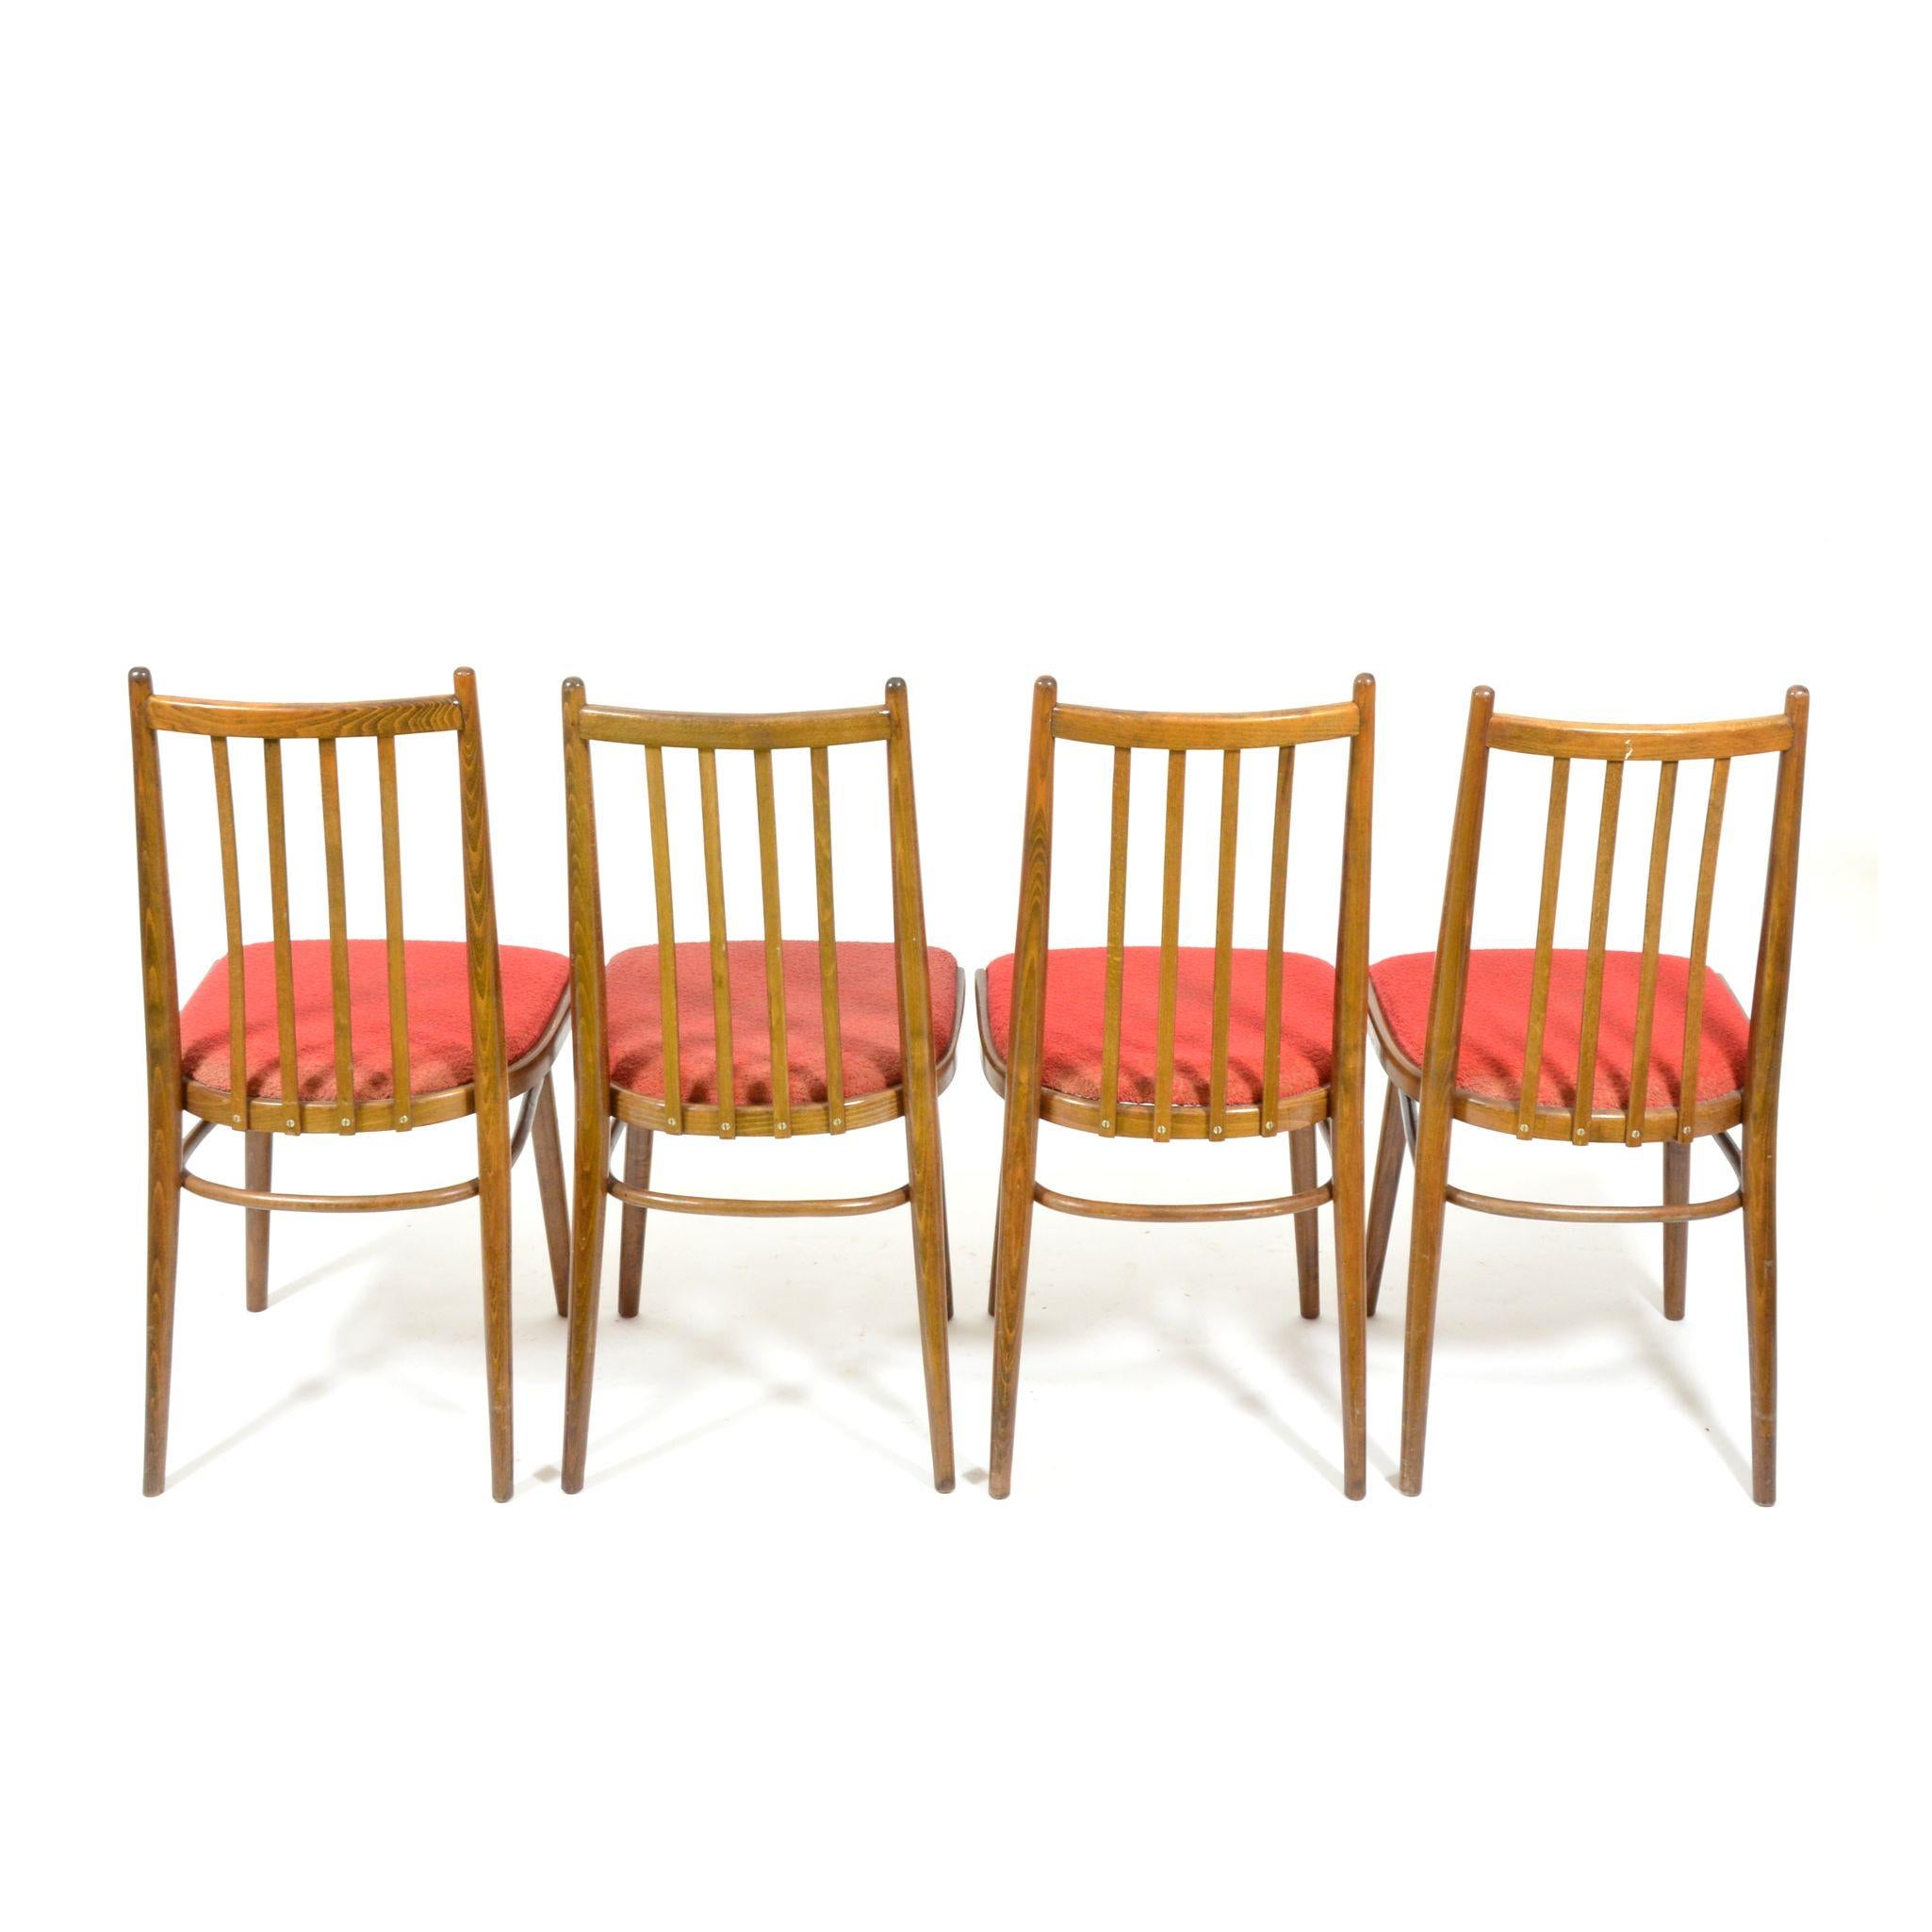 Set of Four Vintage Dining Chairs, Red Upholstered, Czechoslovakia, 1970s For Sale 1